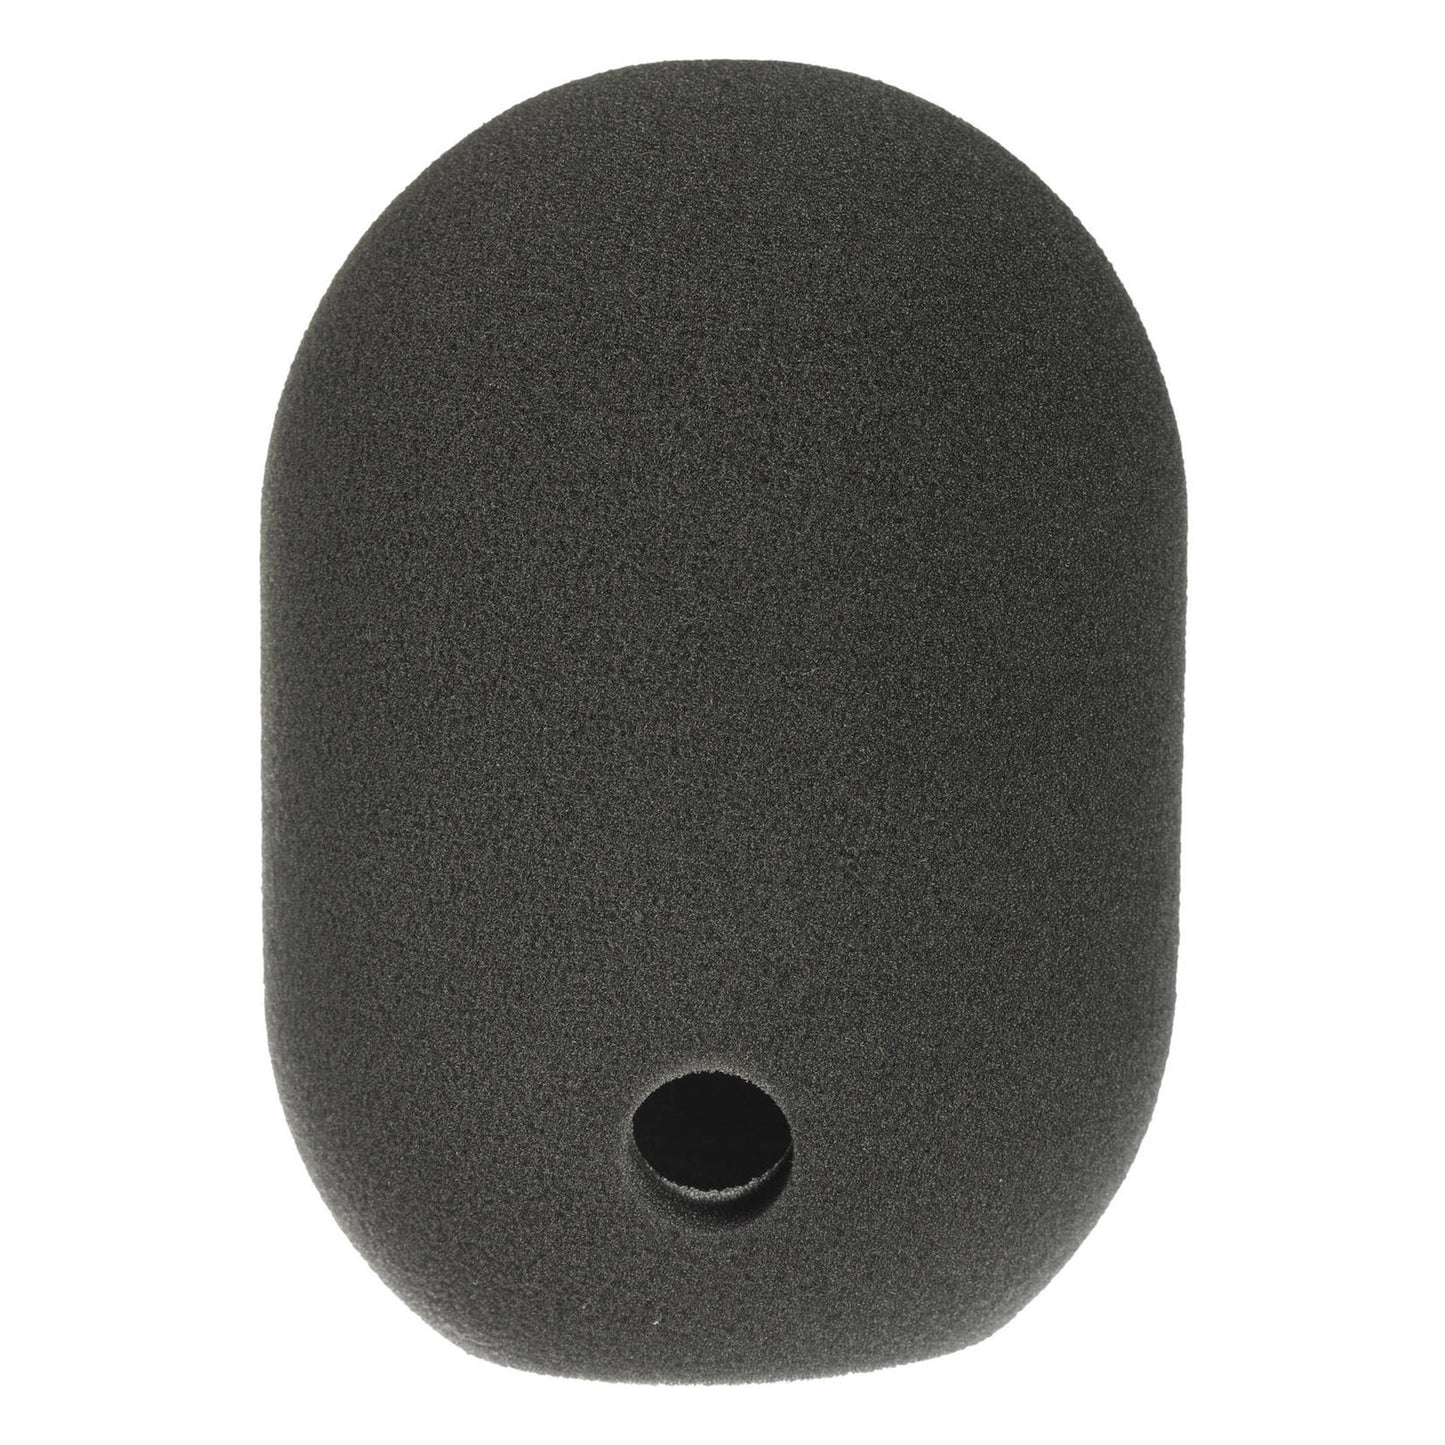 Neumann WS87 Windscreen (For U87 Series and TLM50/103/170R or M147) (WS87)